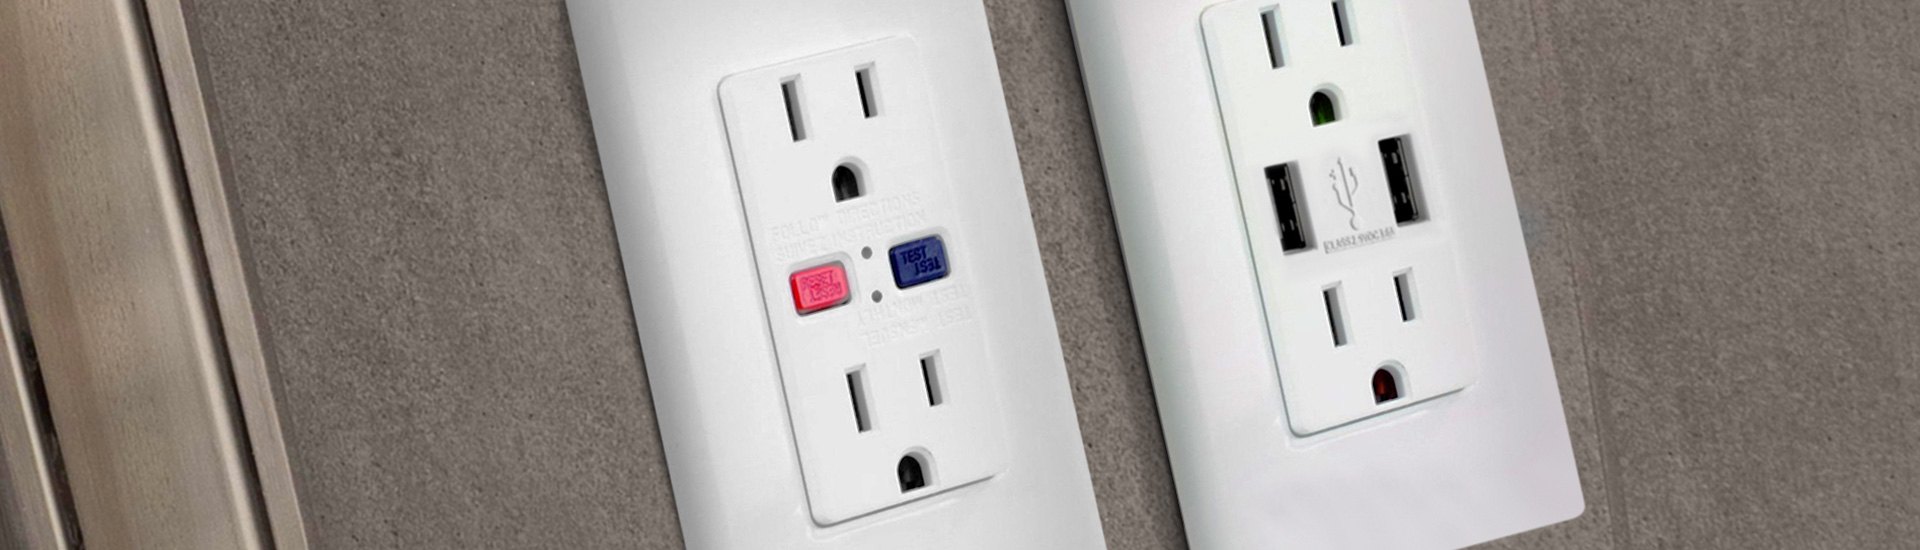 Scanstrut RV Power Outlets